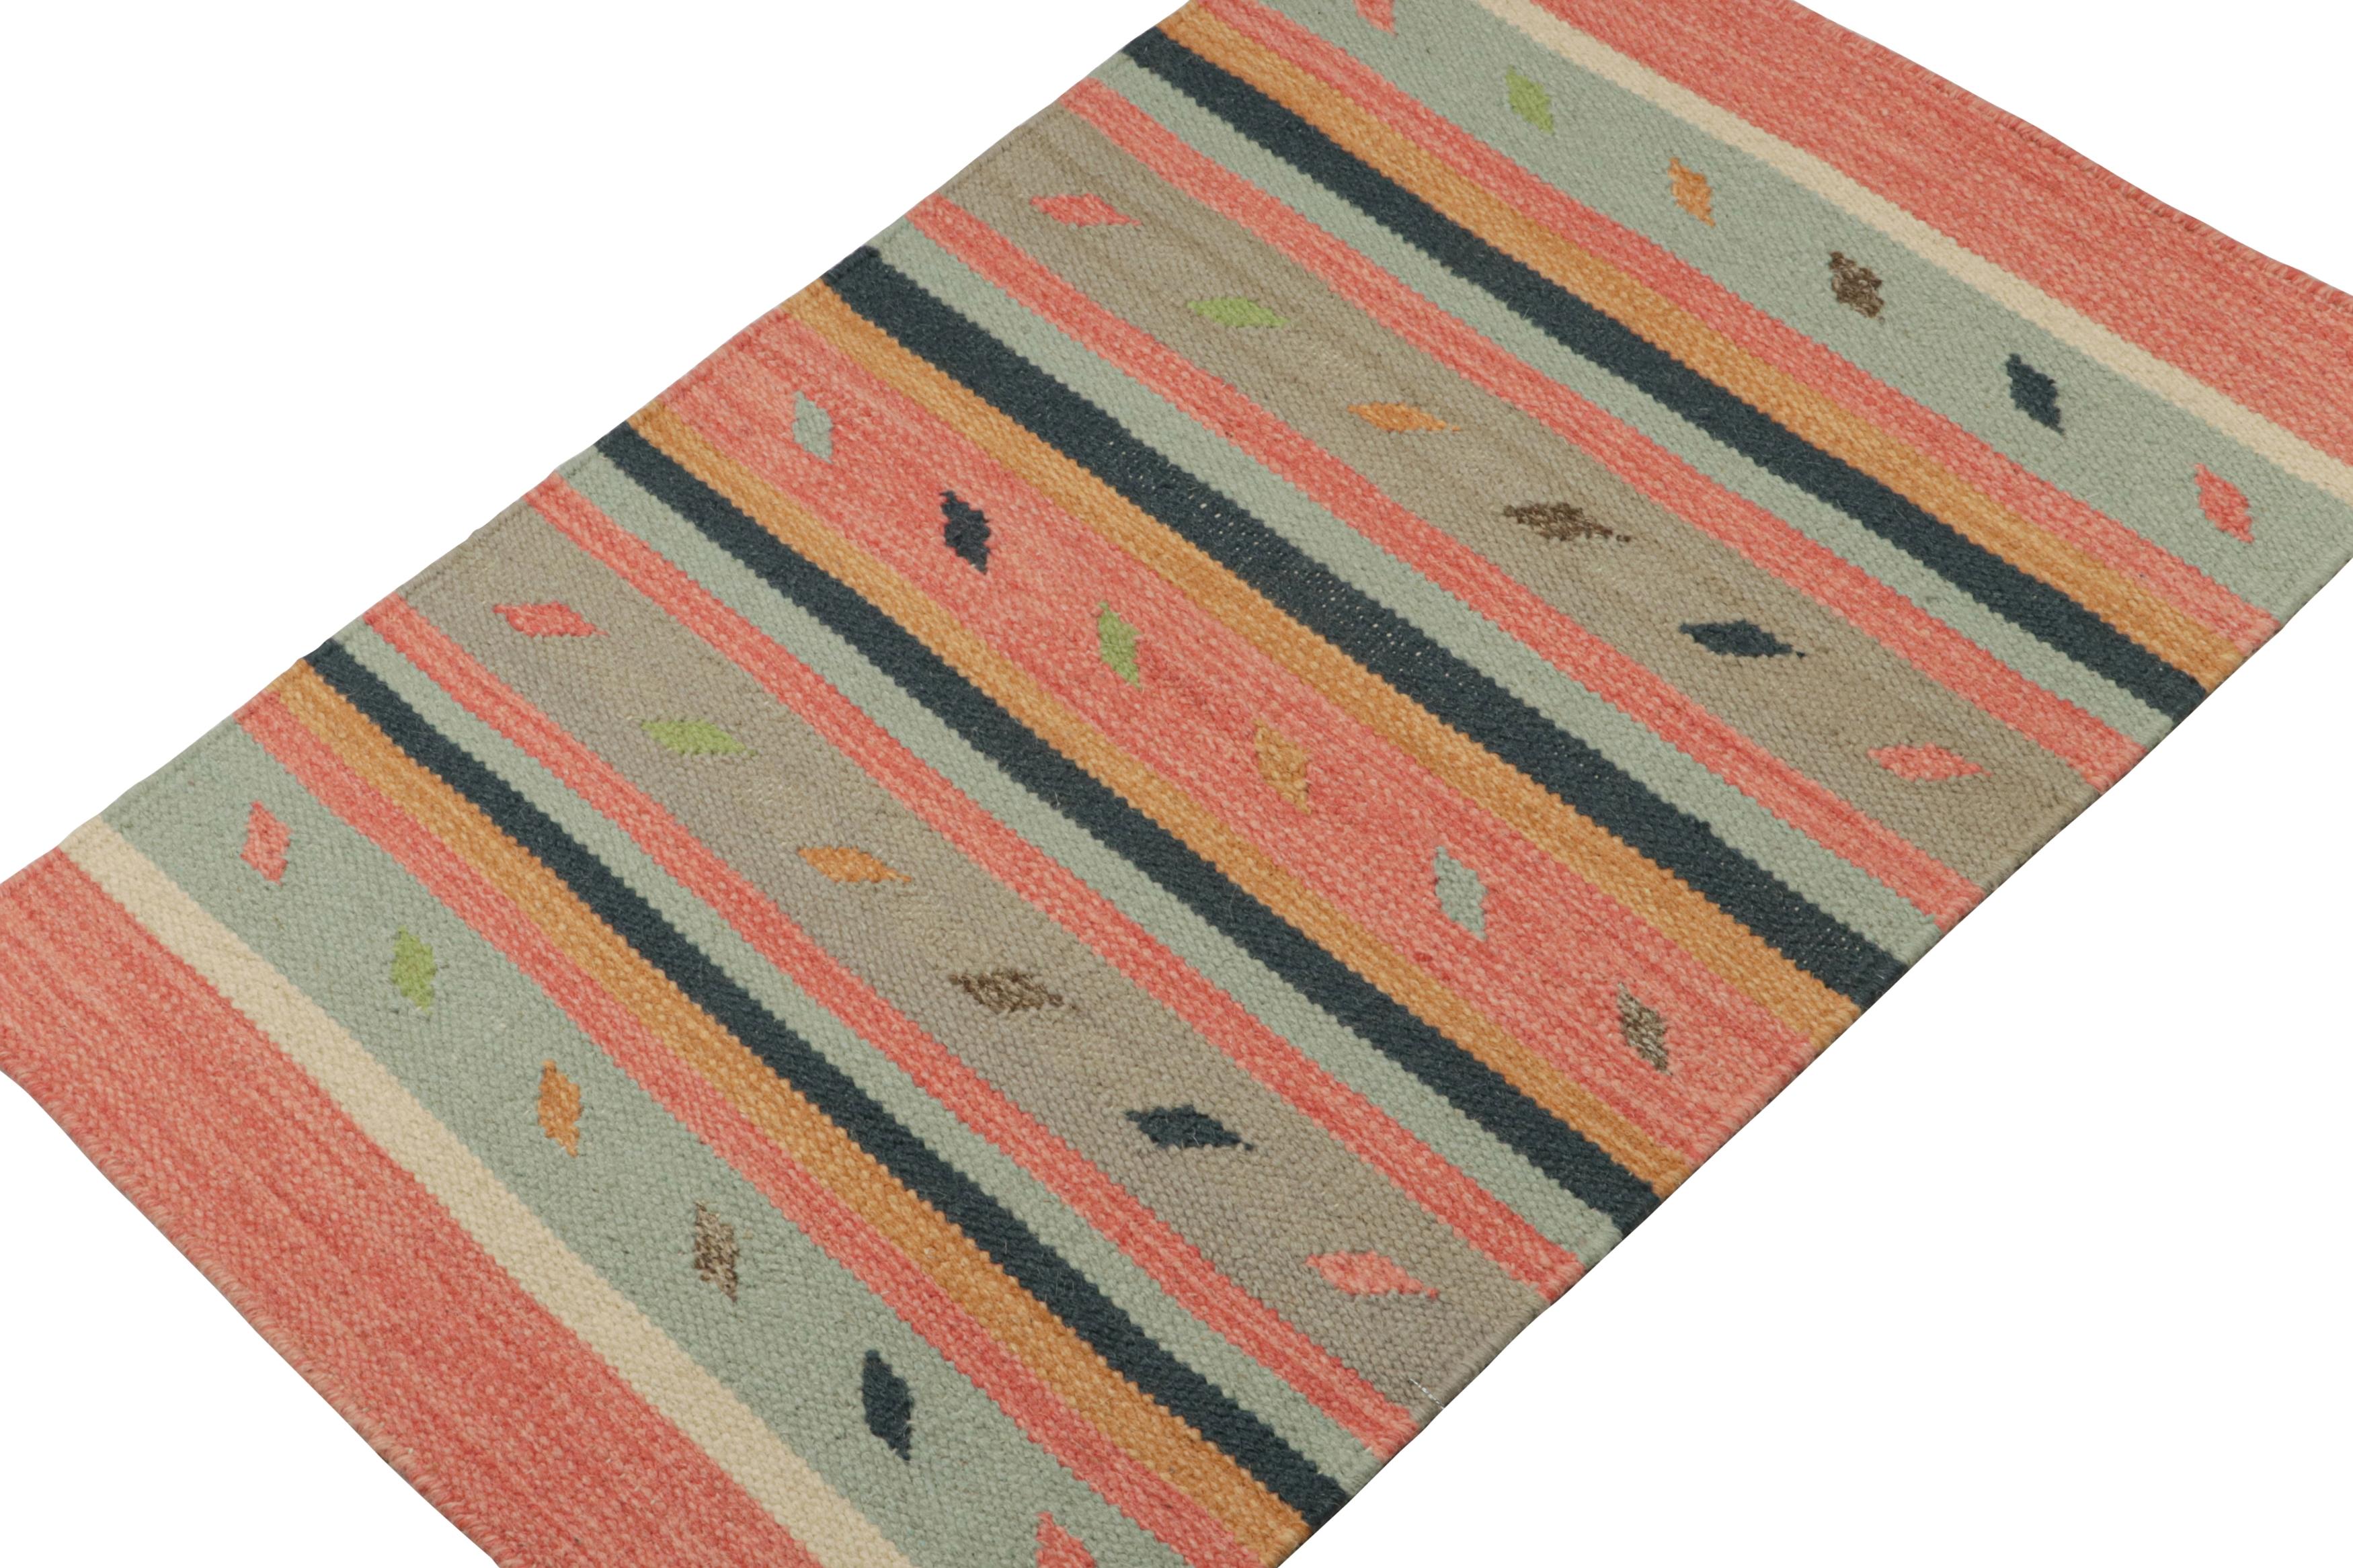 Inspired by tribal kilims, this 2x3 piece is a vibrant new addition to the flatweave collection by Rug & Kilim.  

On the Design: 

Handwoven in wool, this contemporary kilim carries broad stripes & clean patterns in polychromatic colorways. Further